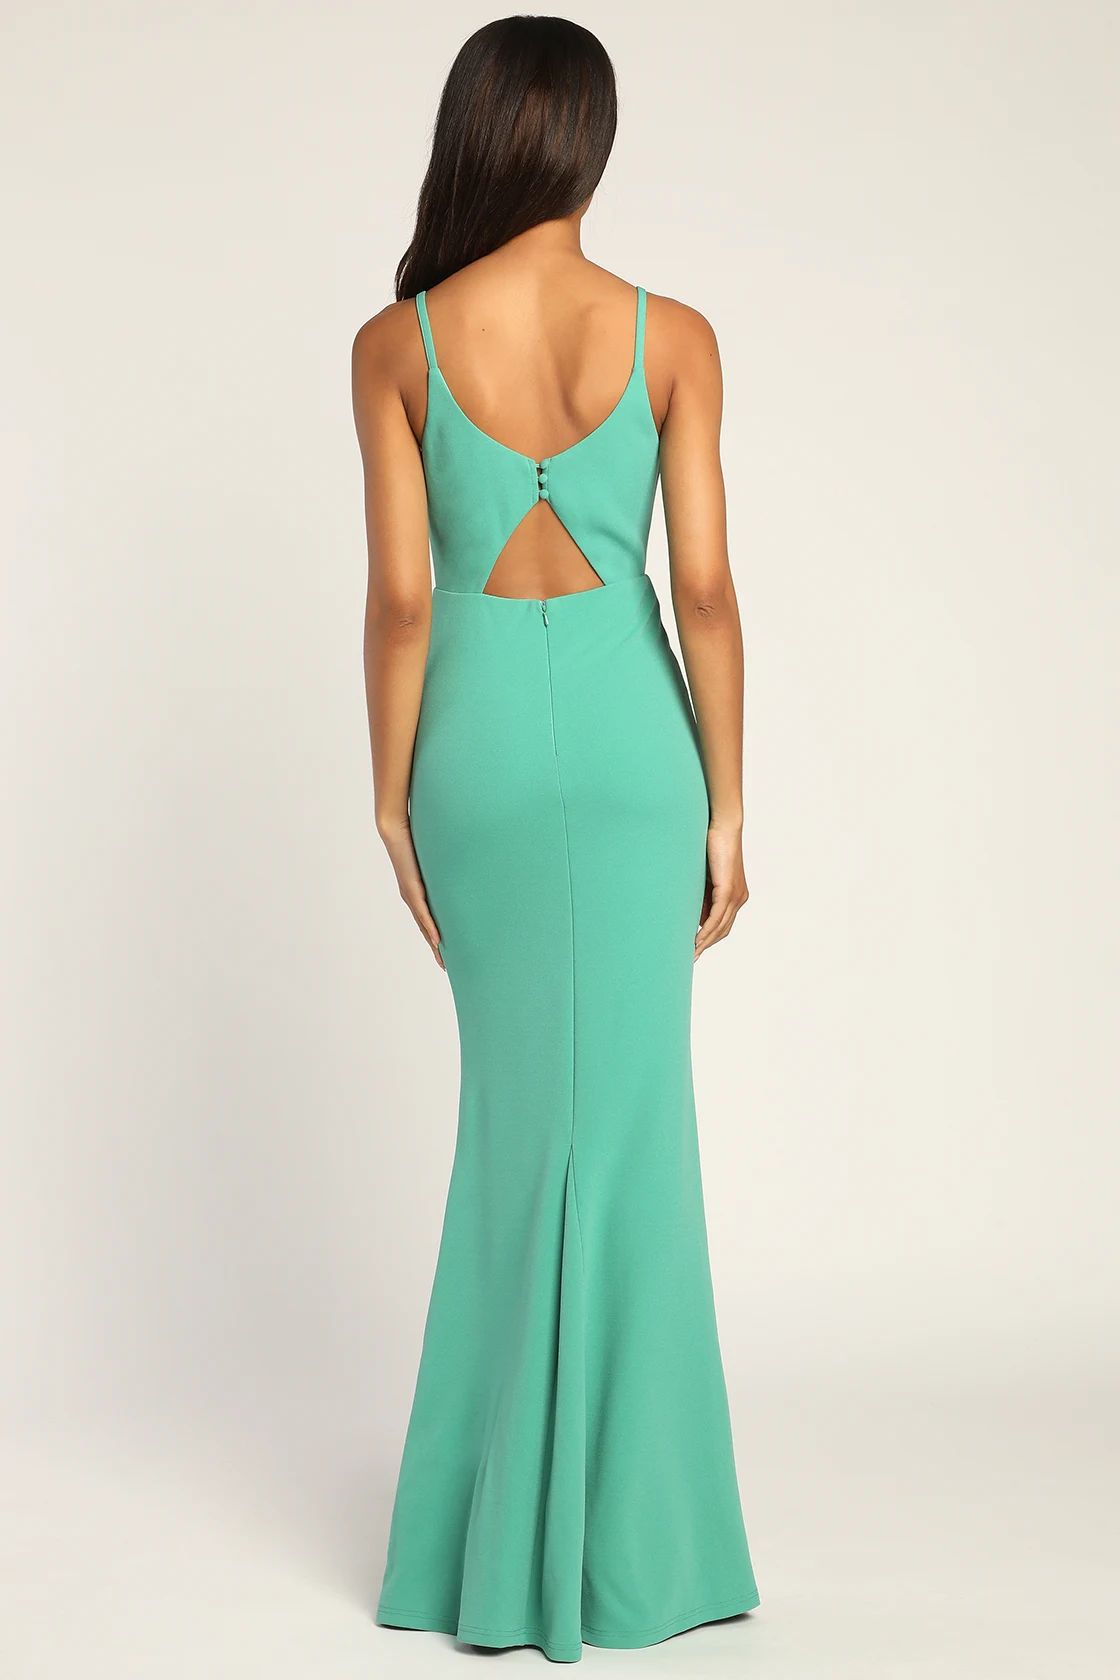 Moments Of Bliss Teal Green Backless Mermaid Maxi Dress | Lulus (US)